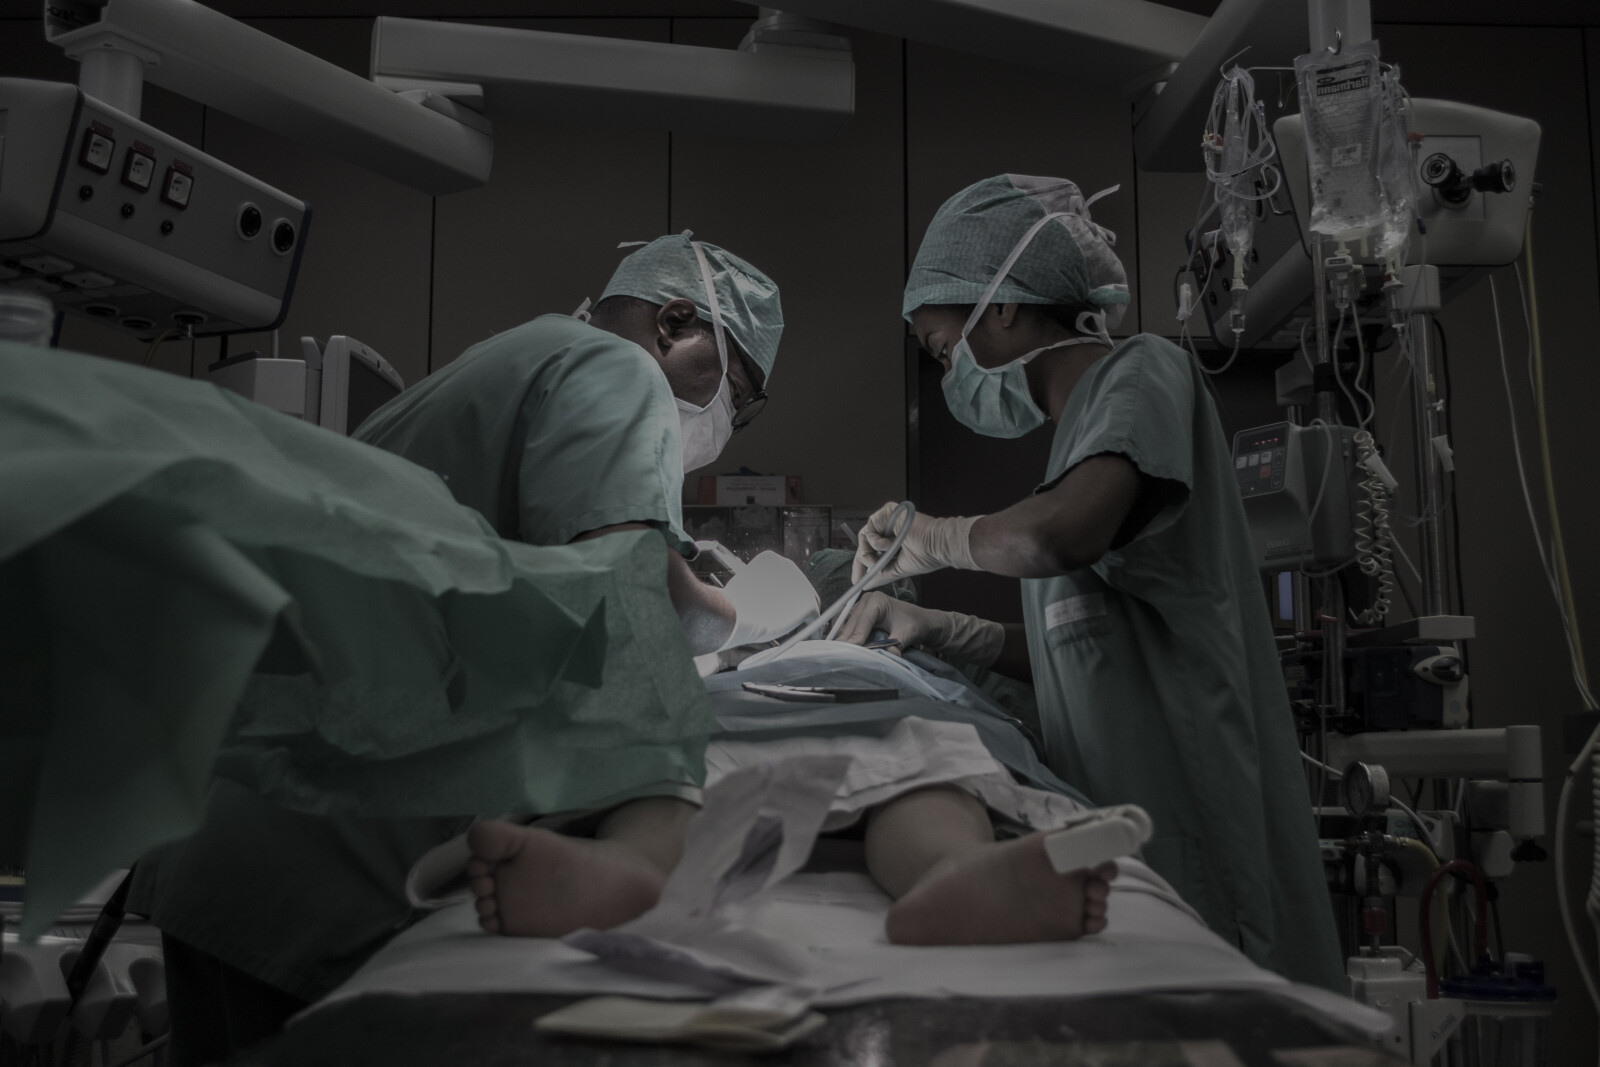 Deadly Negligence: The Shocking Truth About Medical Malpractice